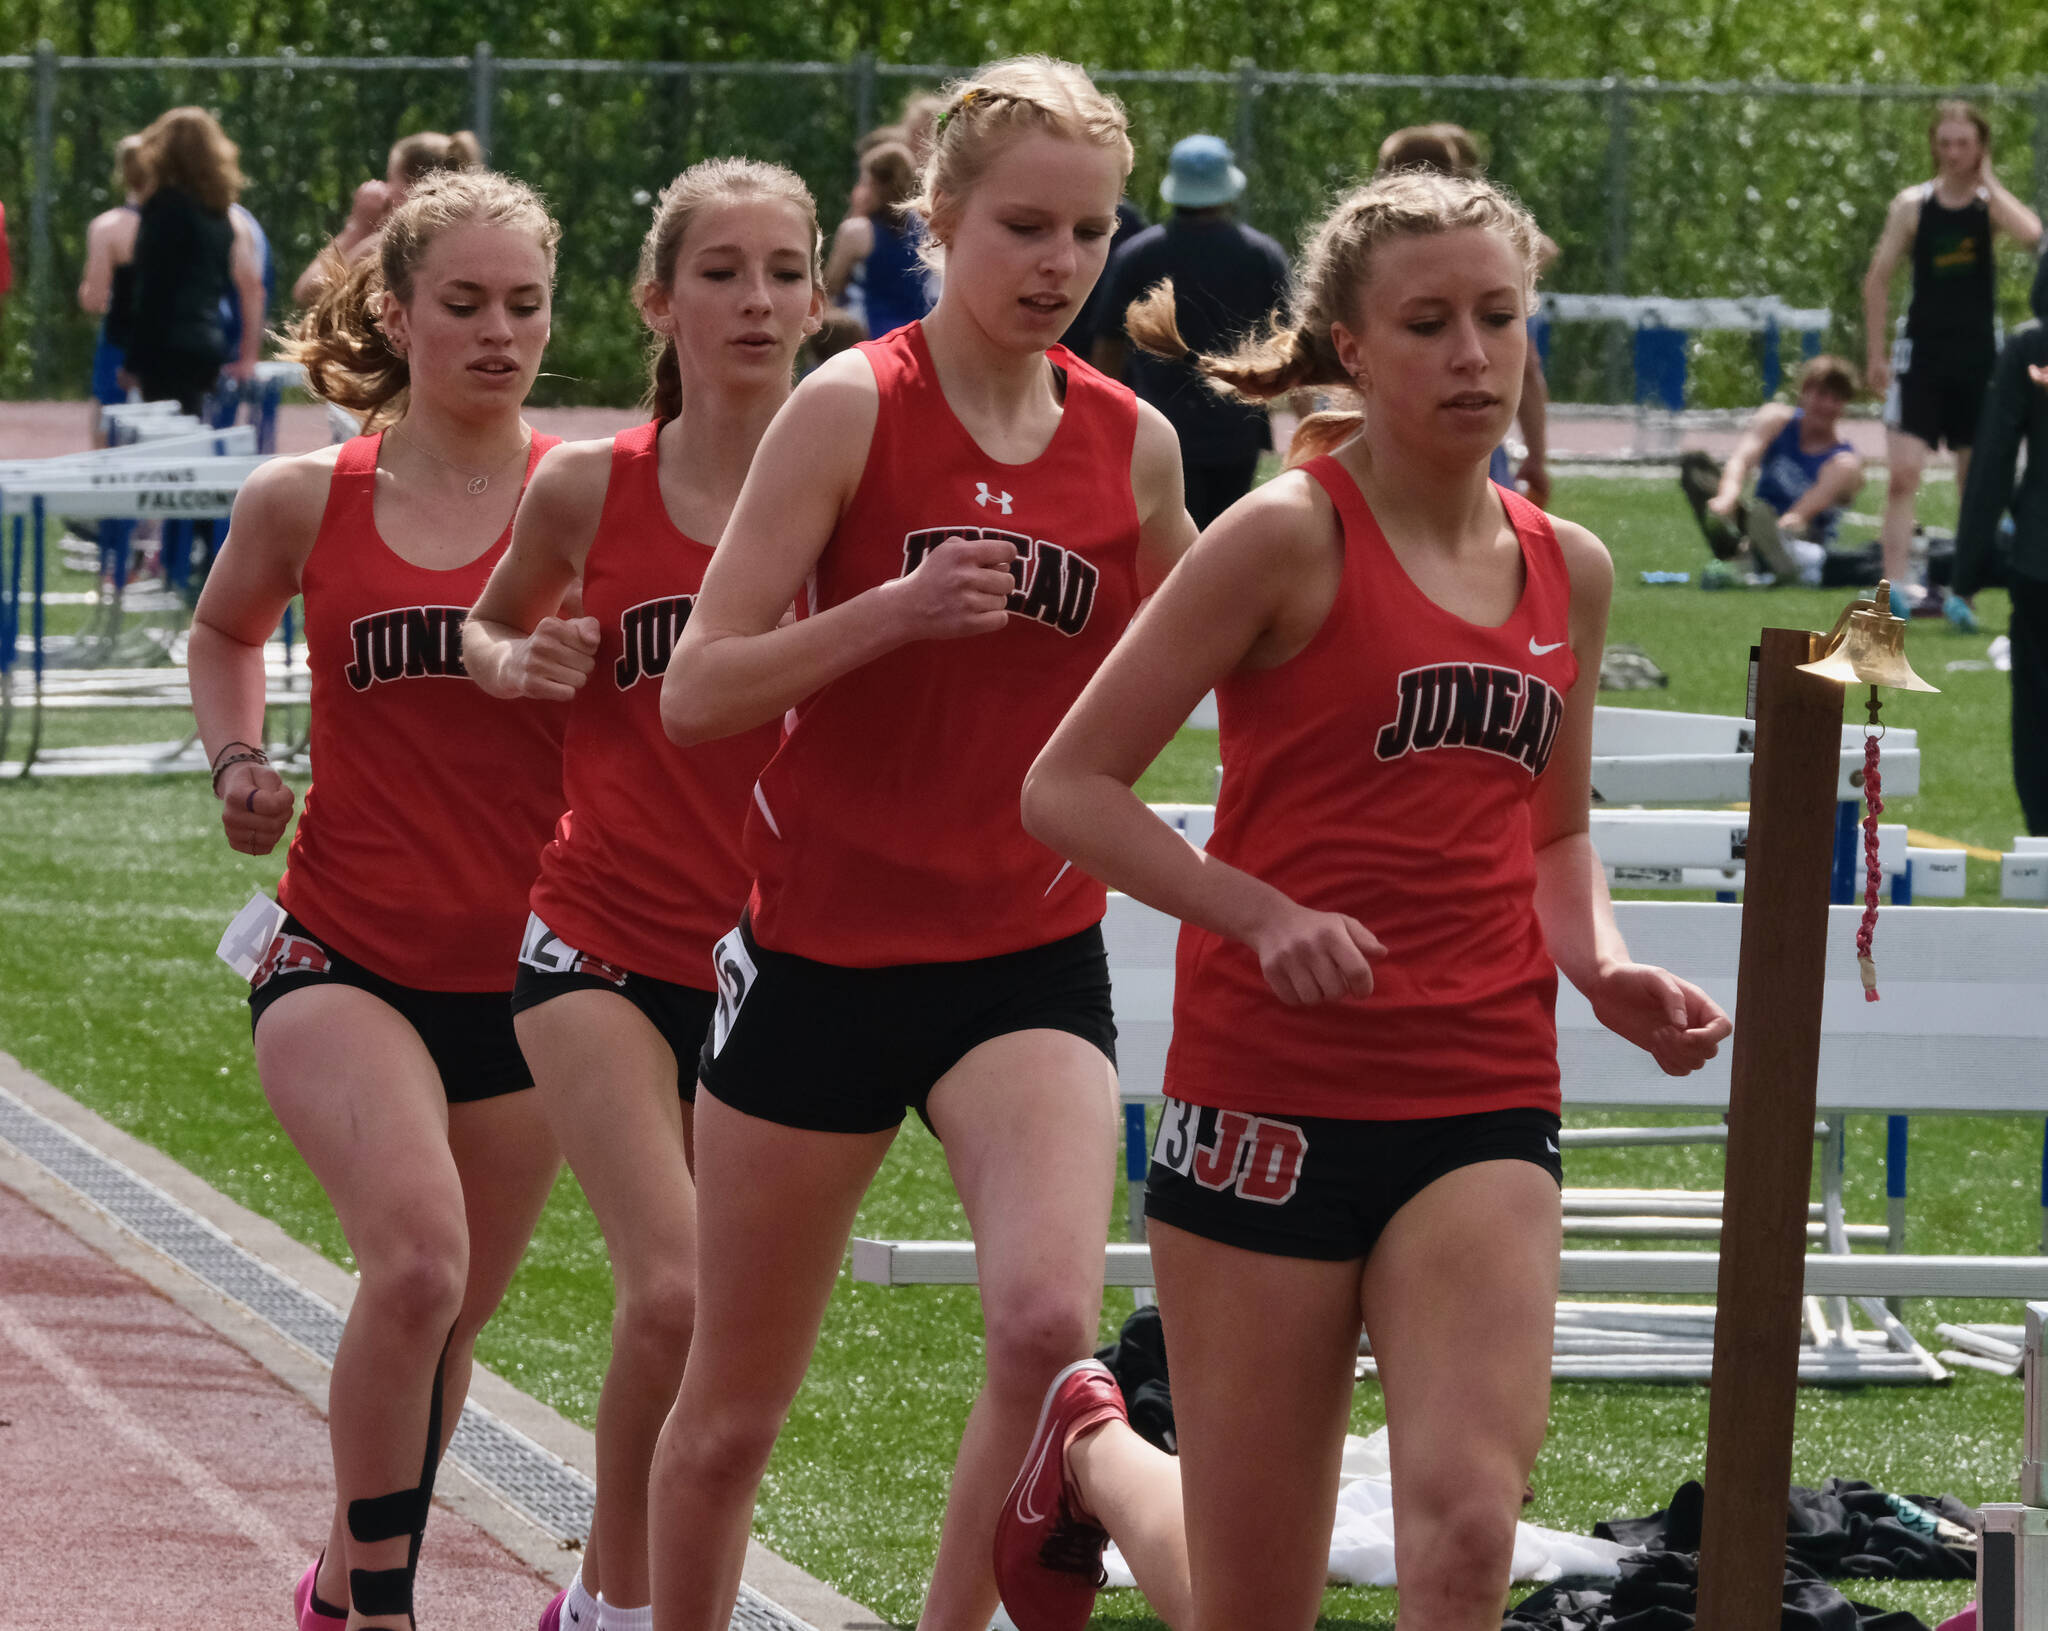 Juneau-Douglas High School: Yadaa.at Kalé junior Etta Eller leads sophomore Ida Meyer, junior Rayna Tuckwood and sophomore Pacific Ricke during the Division I girls 1600 meters at the Region V Track & Field Championships, Saturday at Thunder Mountain High School. (Klas Stolpe / Juneau Empire)